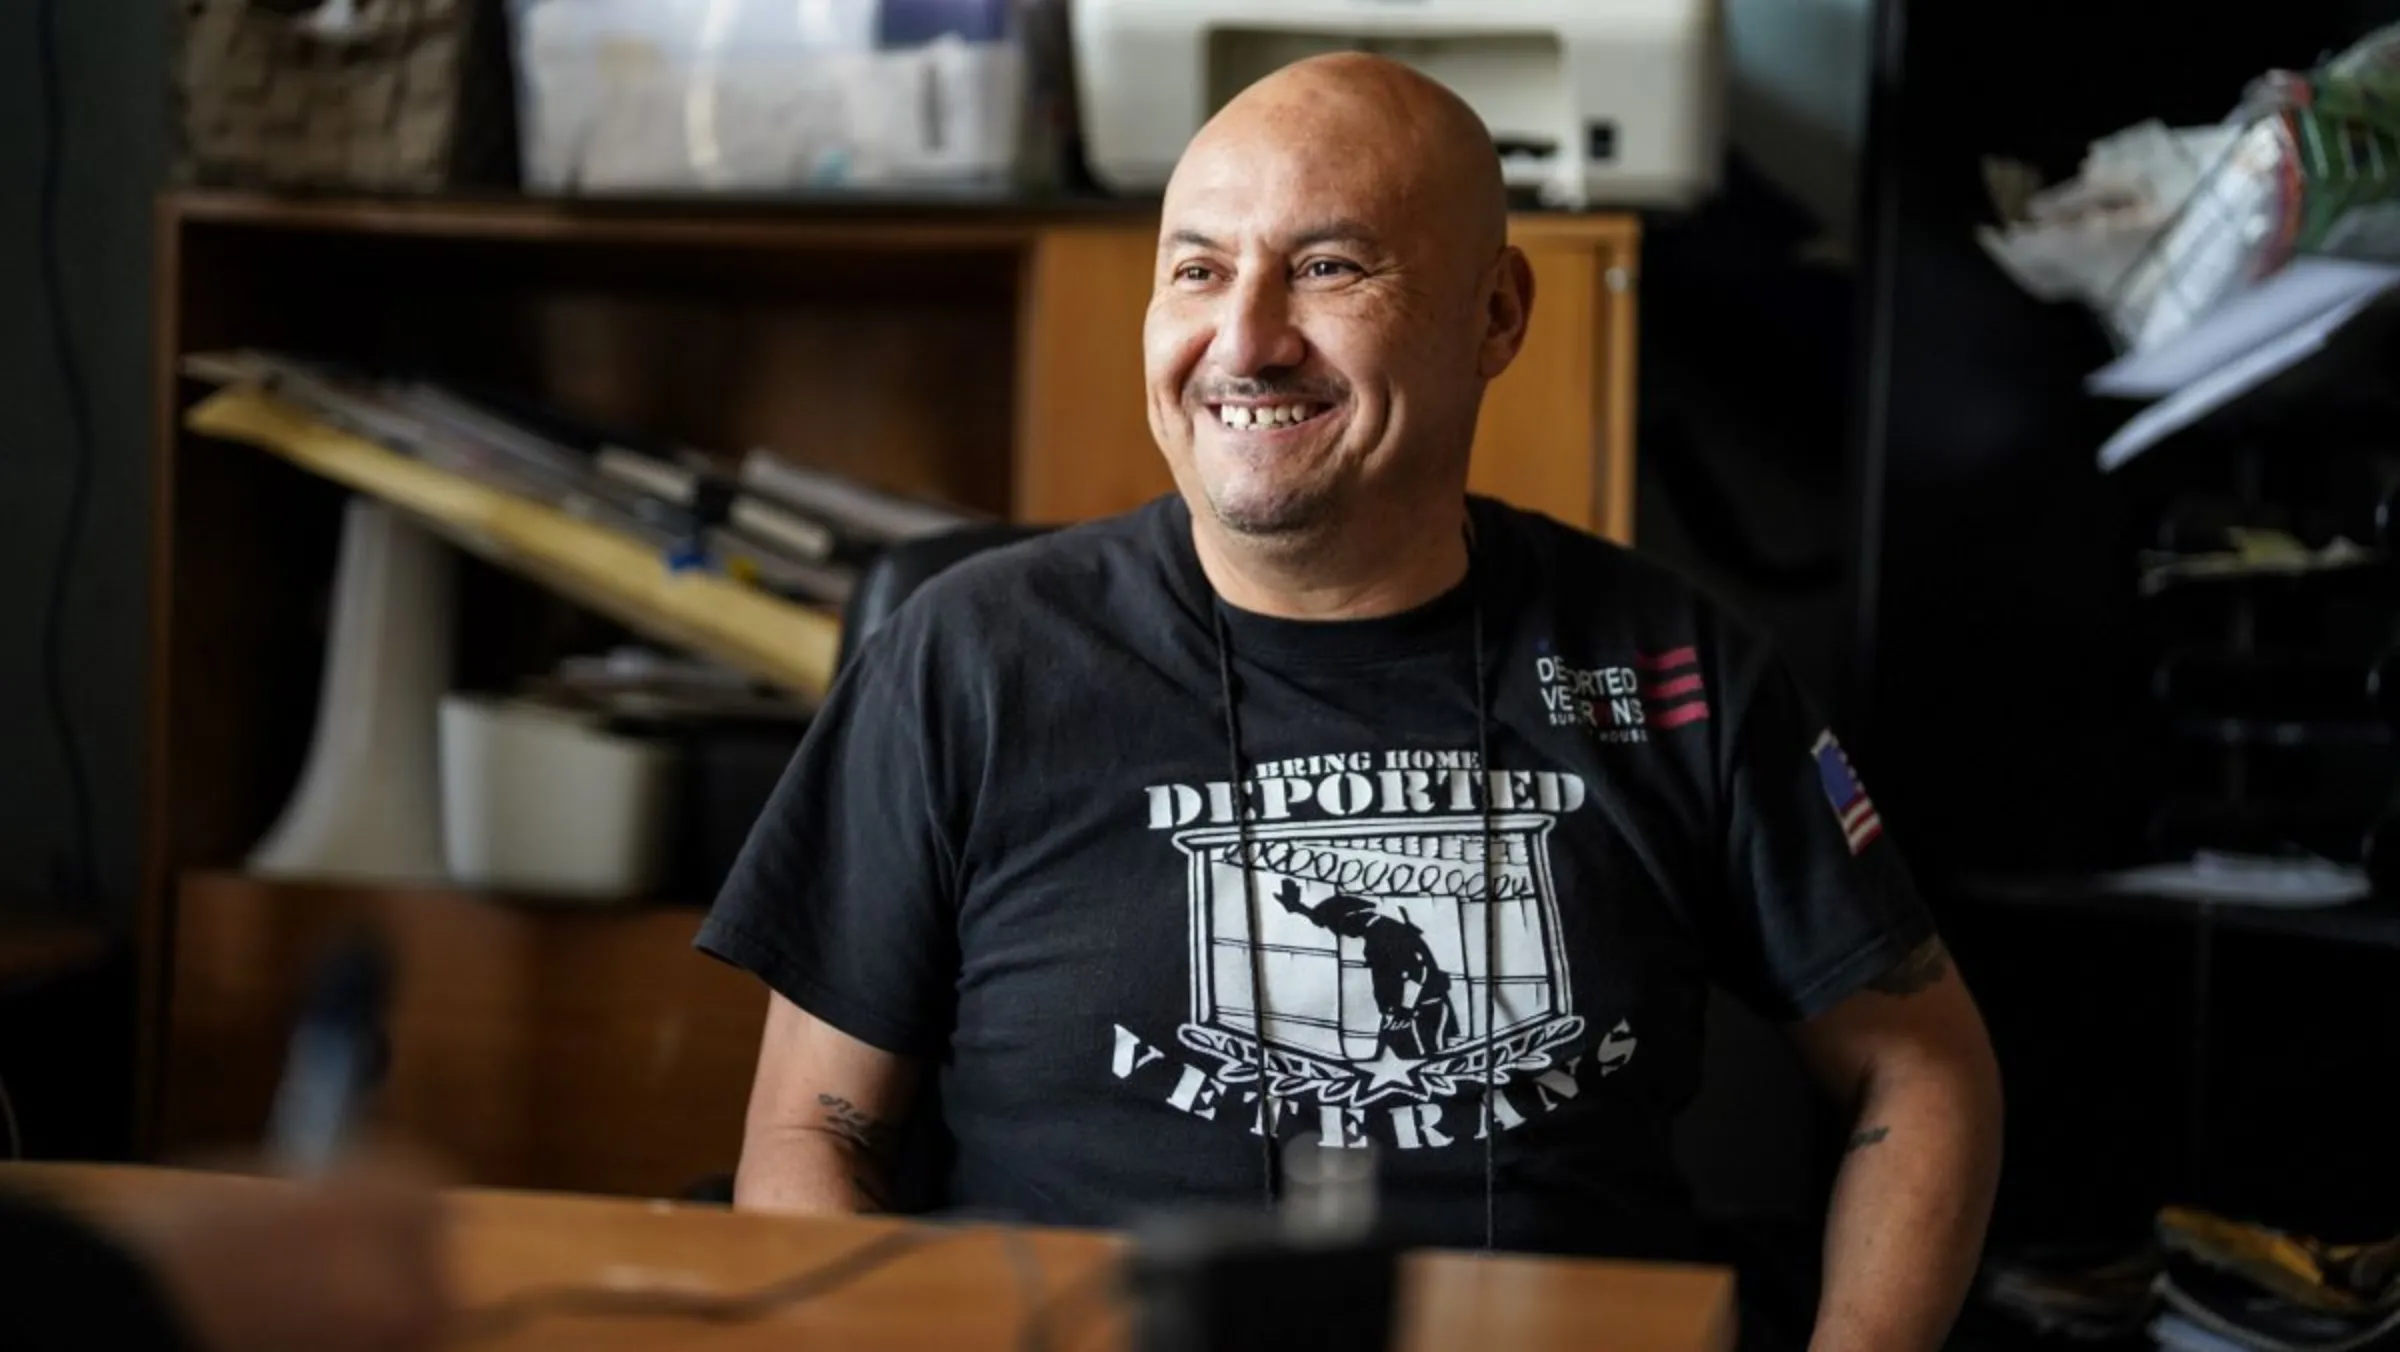 Hector Barajas, at the offices of 'The Bunker,' a gathering place for deported veterans in, Mexico, February, 22 2023. Thomson Reuters Foundation/Manuel Ocano.